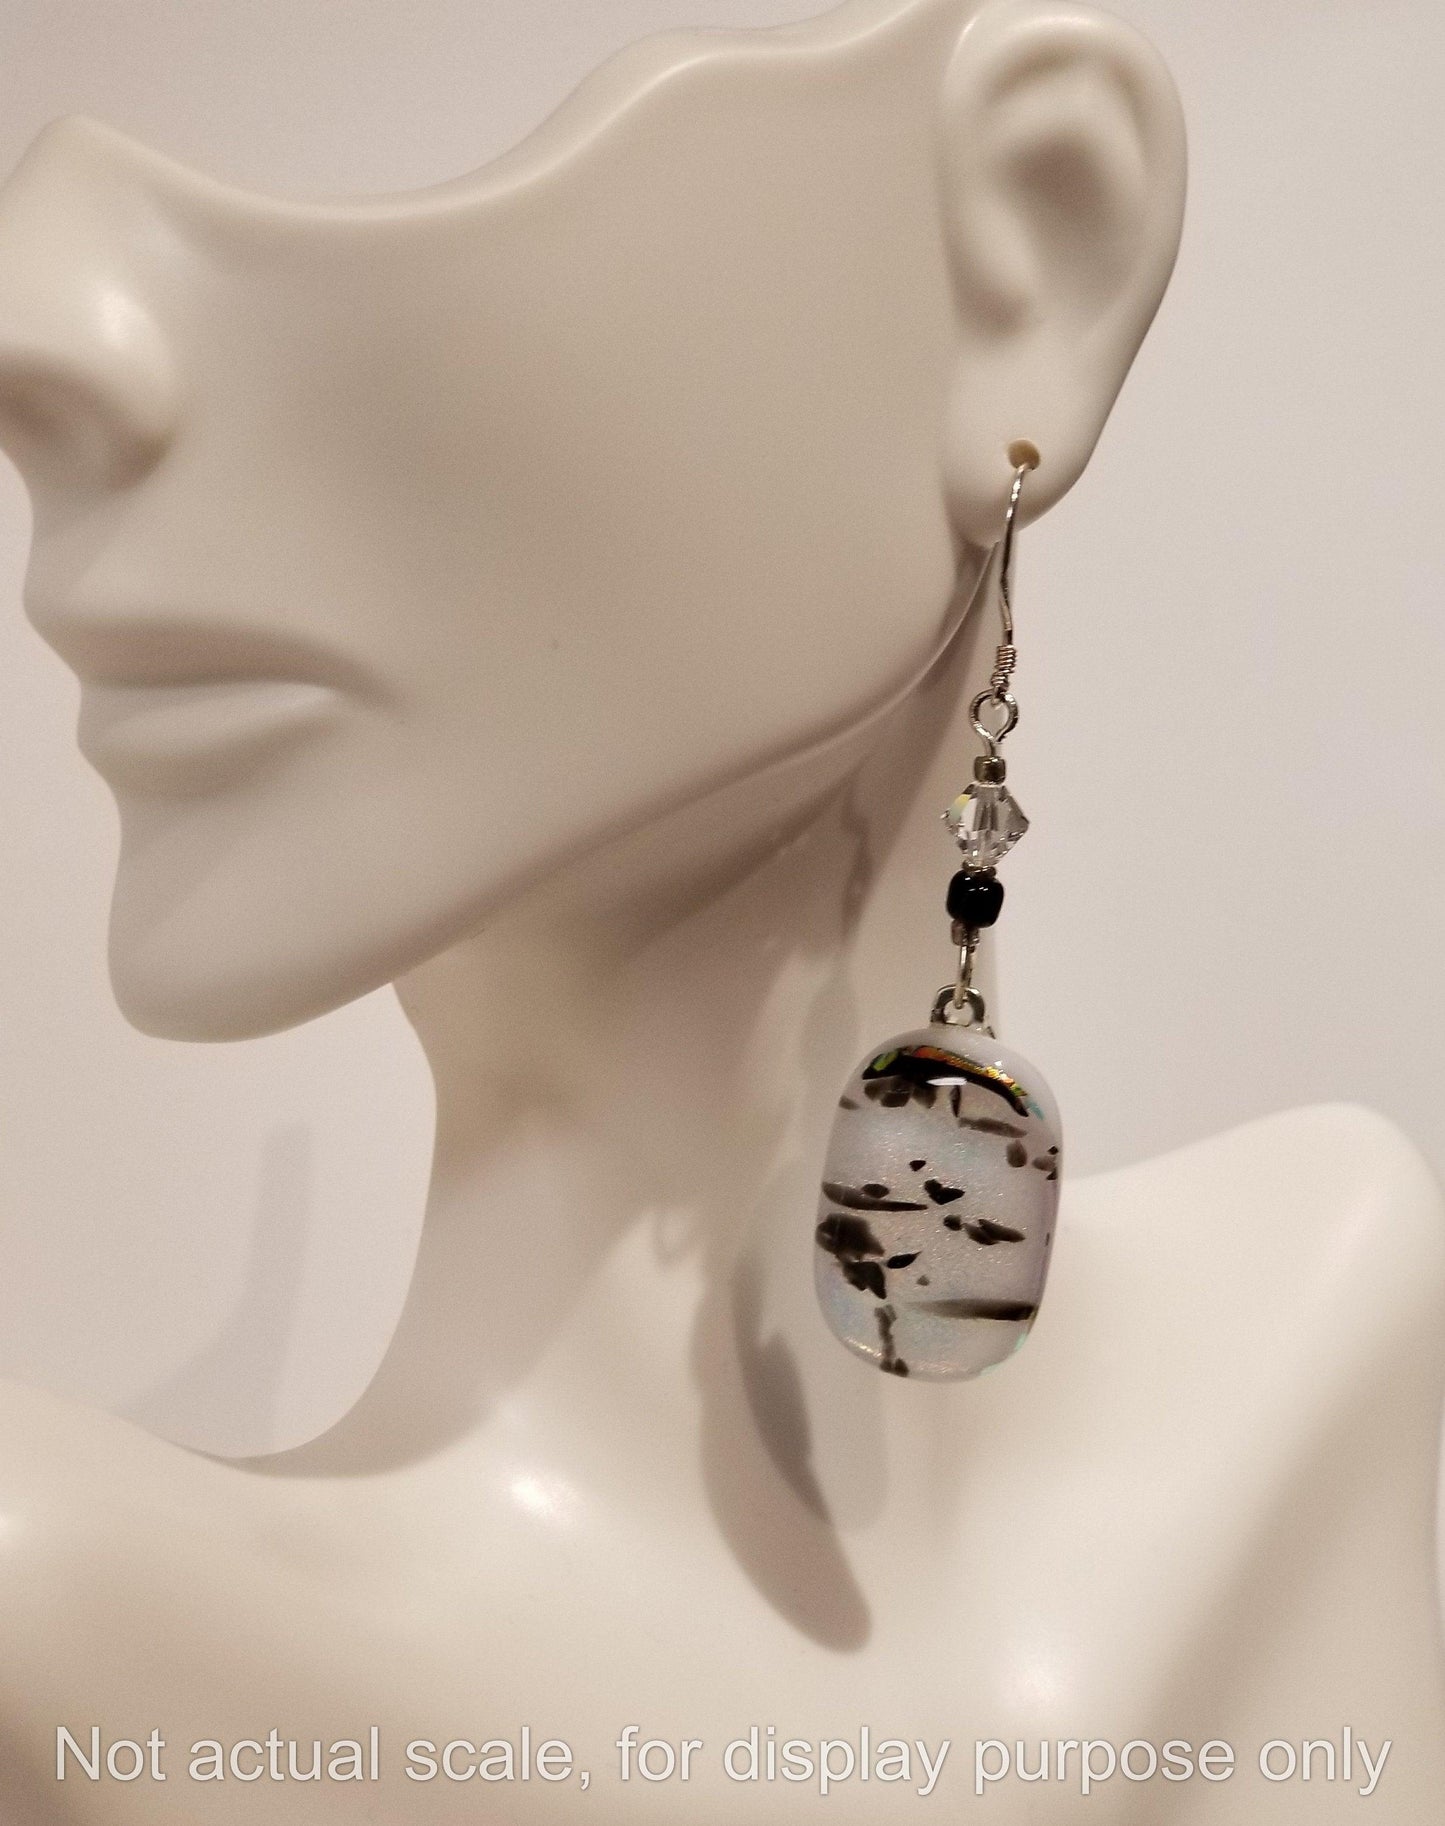 White and Black spotted fused glass jewelry, pierced dangle earrings, silver wire dangle style